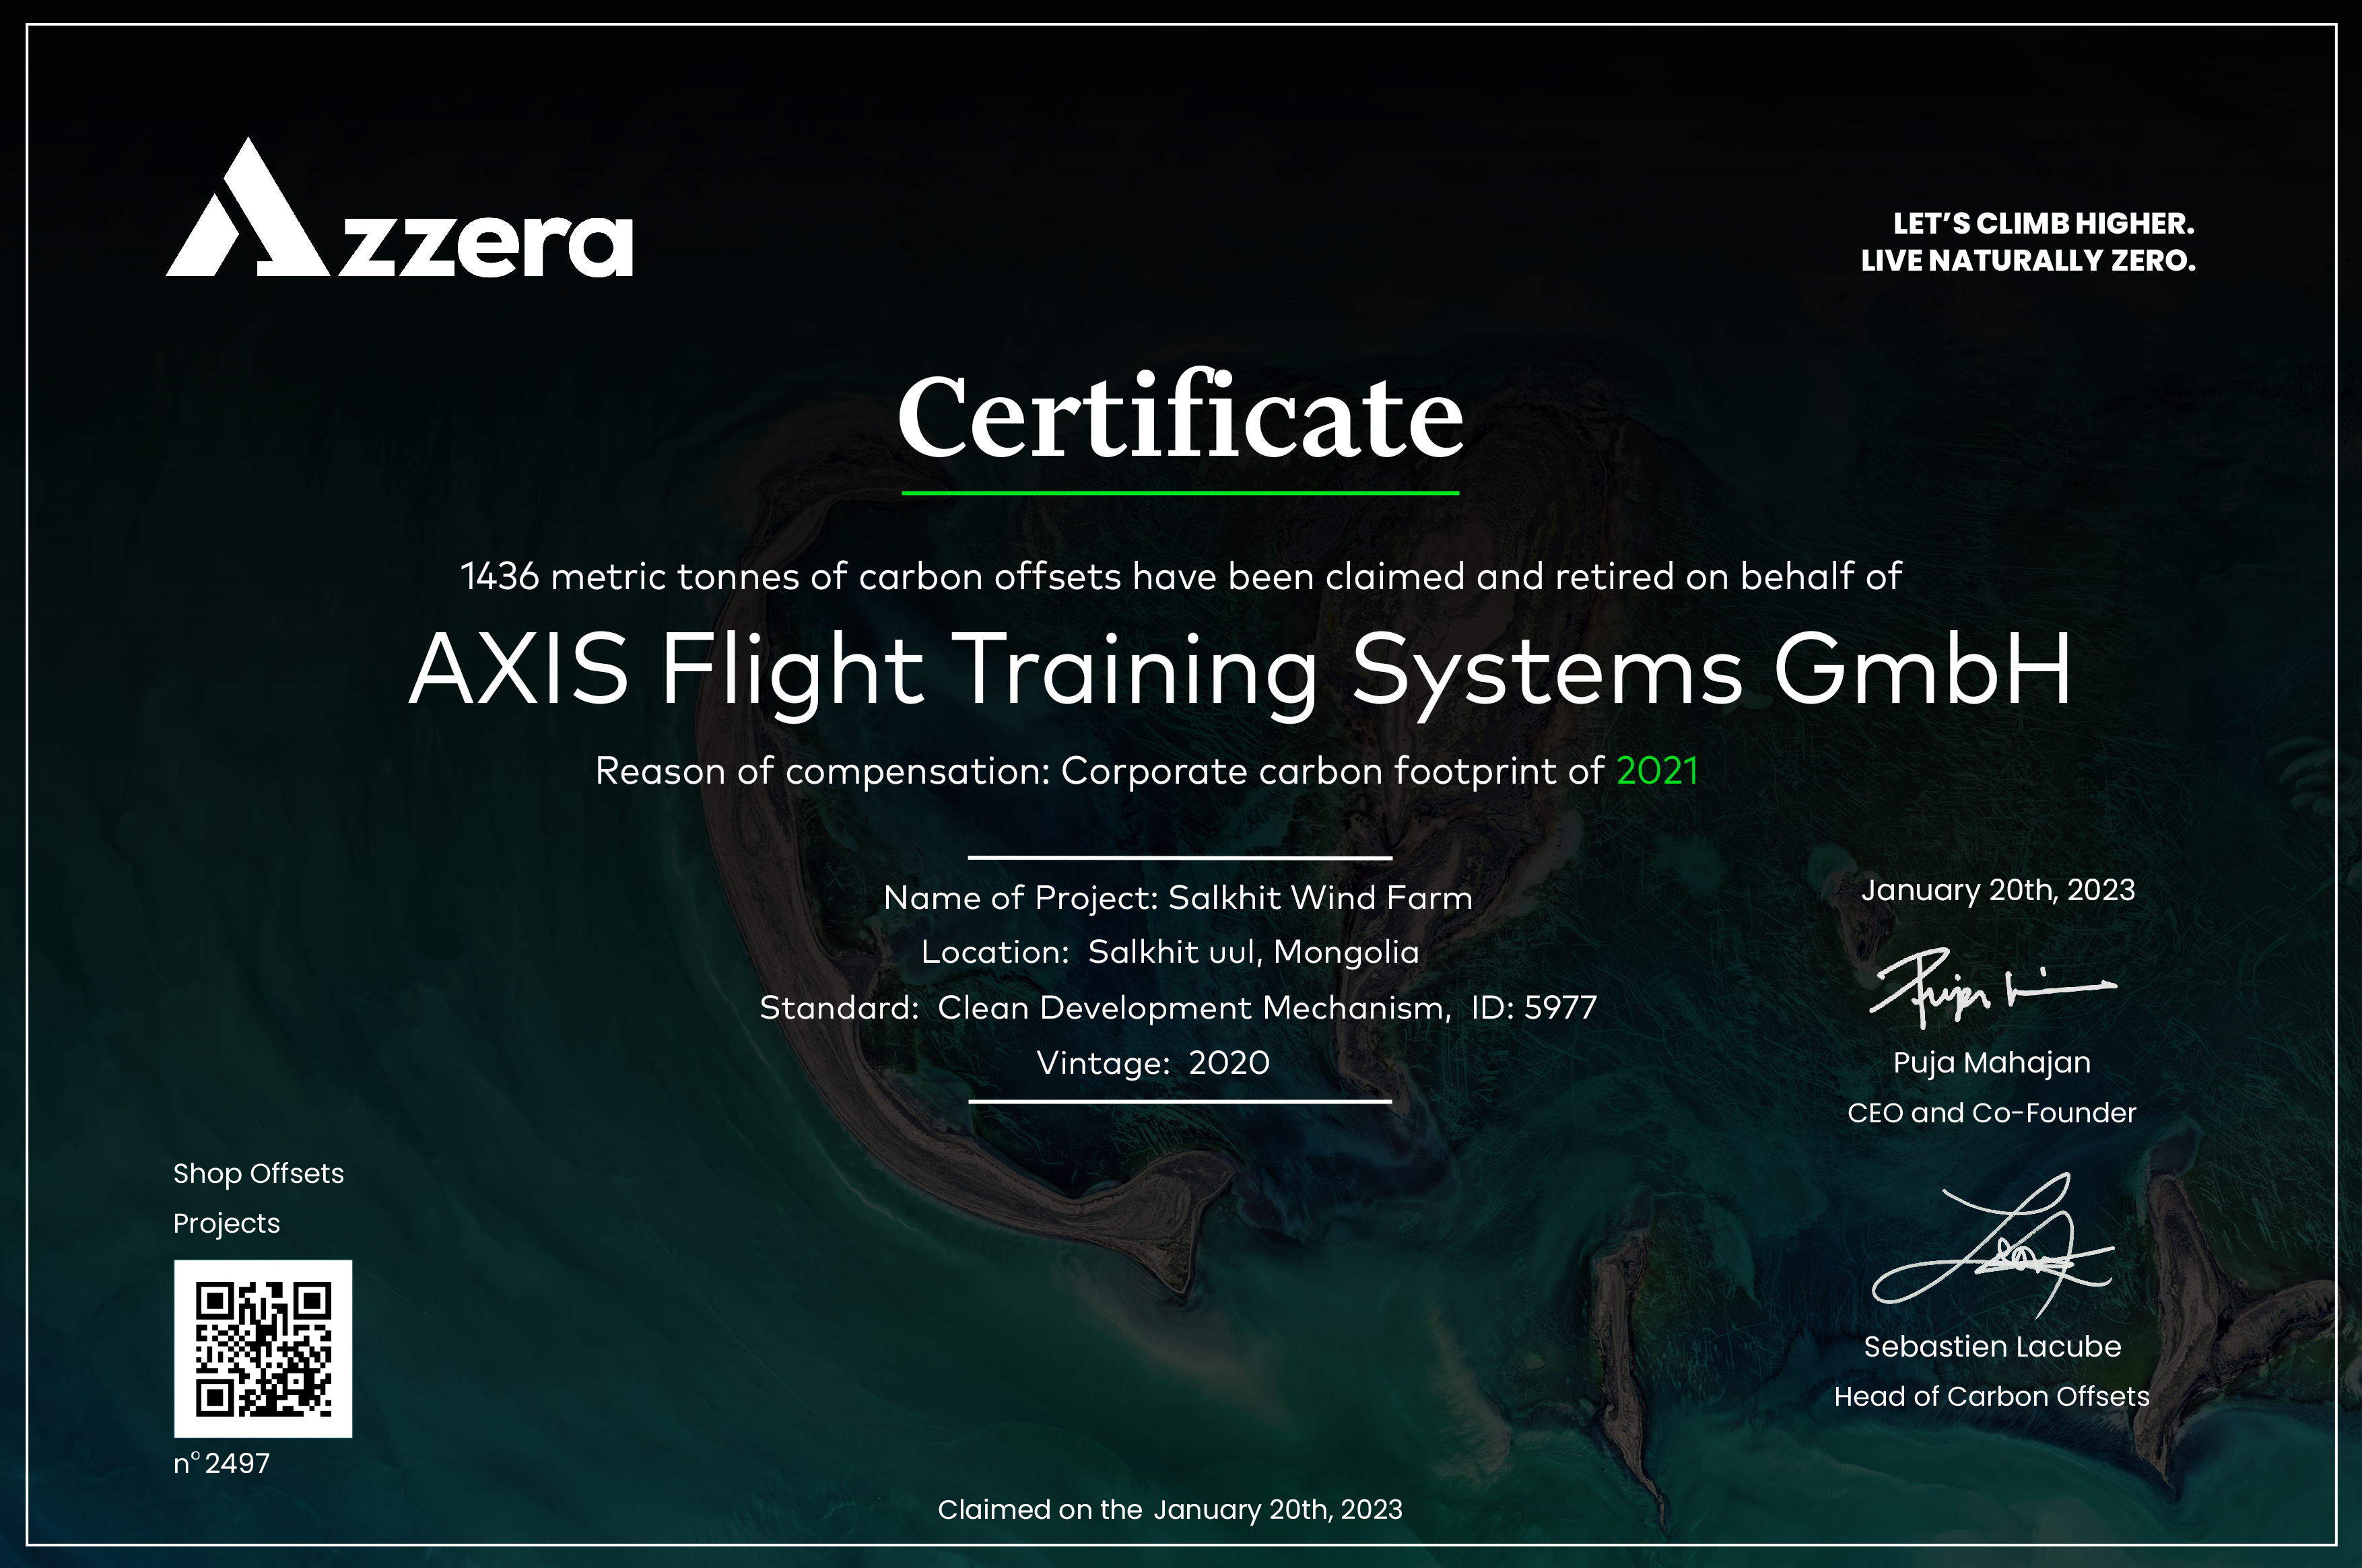 Axis Certificate 2021